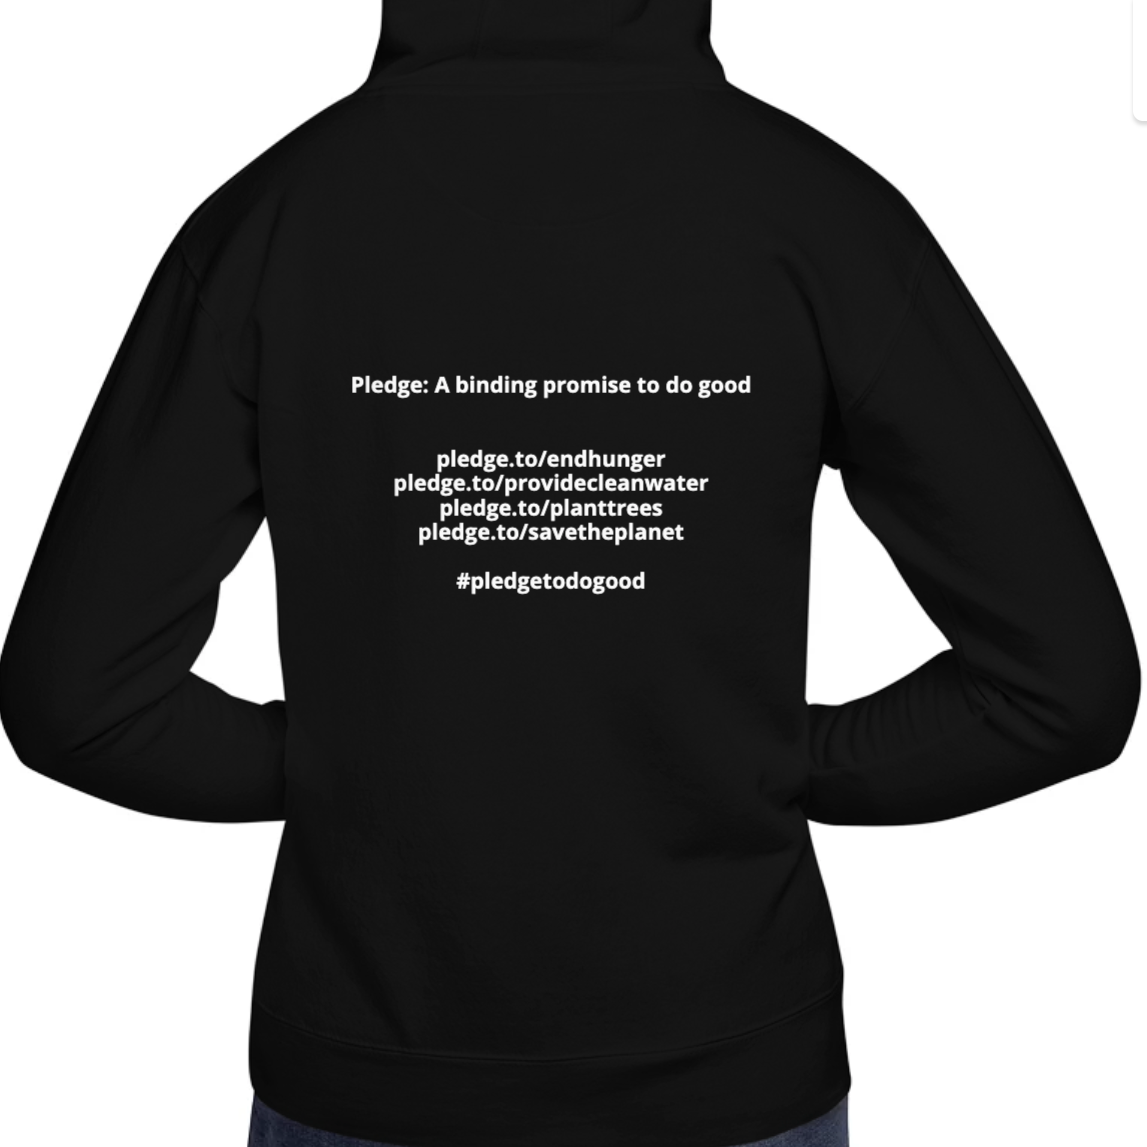 Customer Round-Up/Add a donation Hoodie